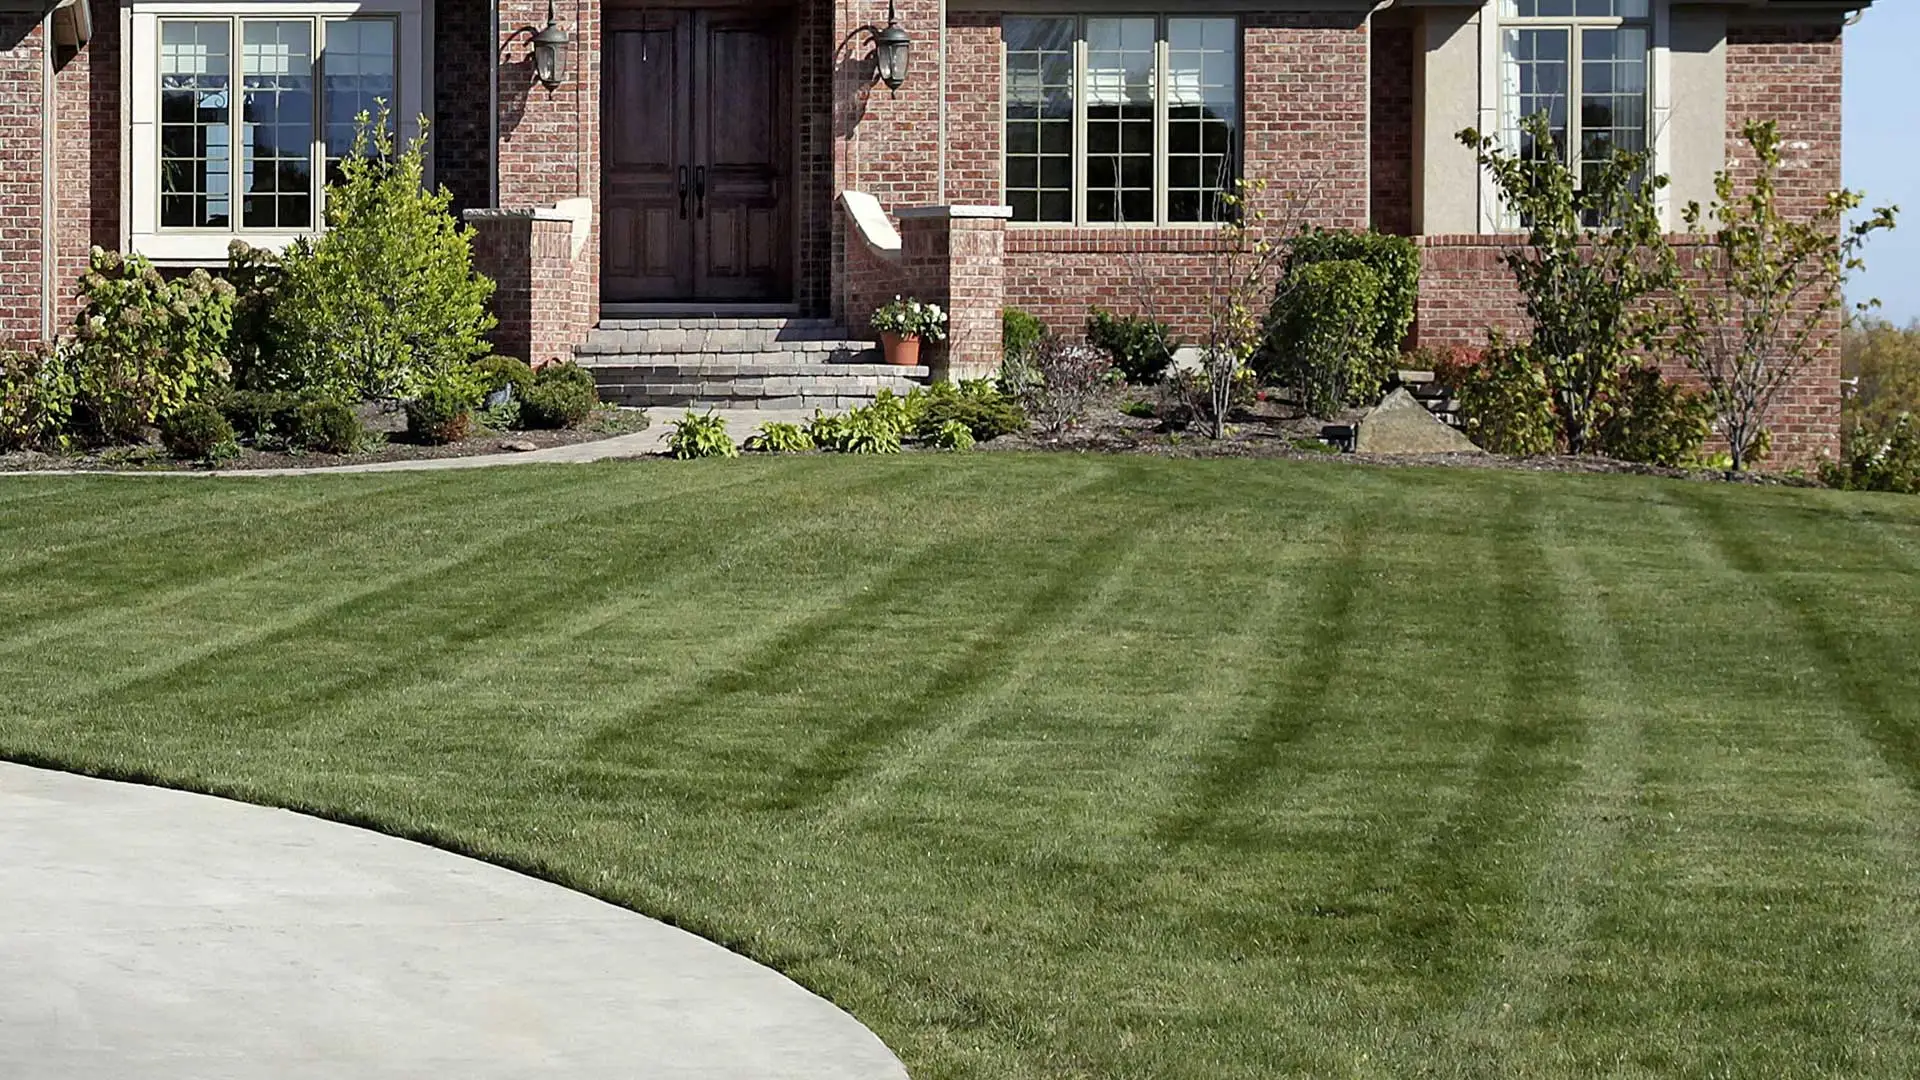 Beautiful green lawn cut with mowing stripes in the front lawn of a home in Rhinecliff, NY.